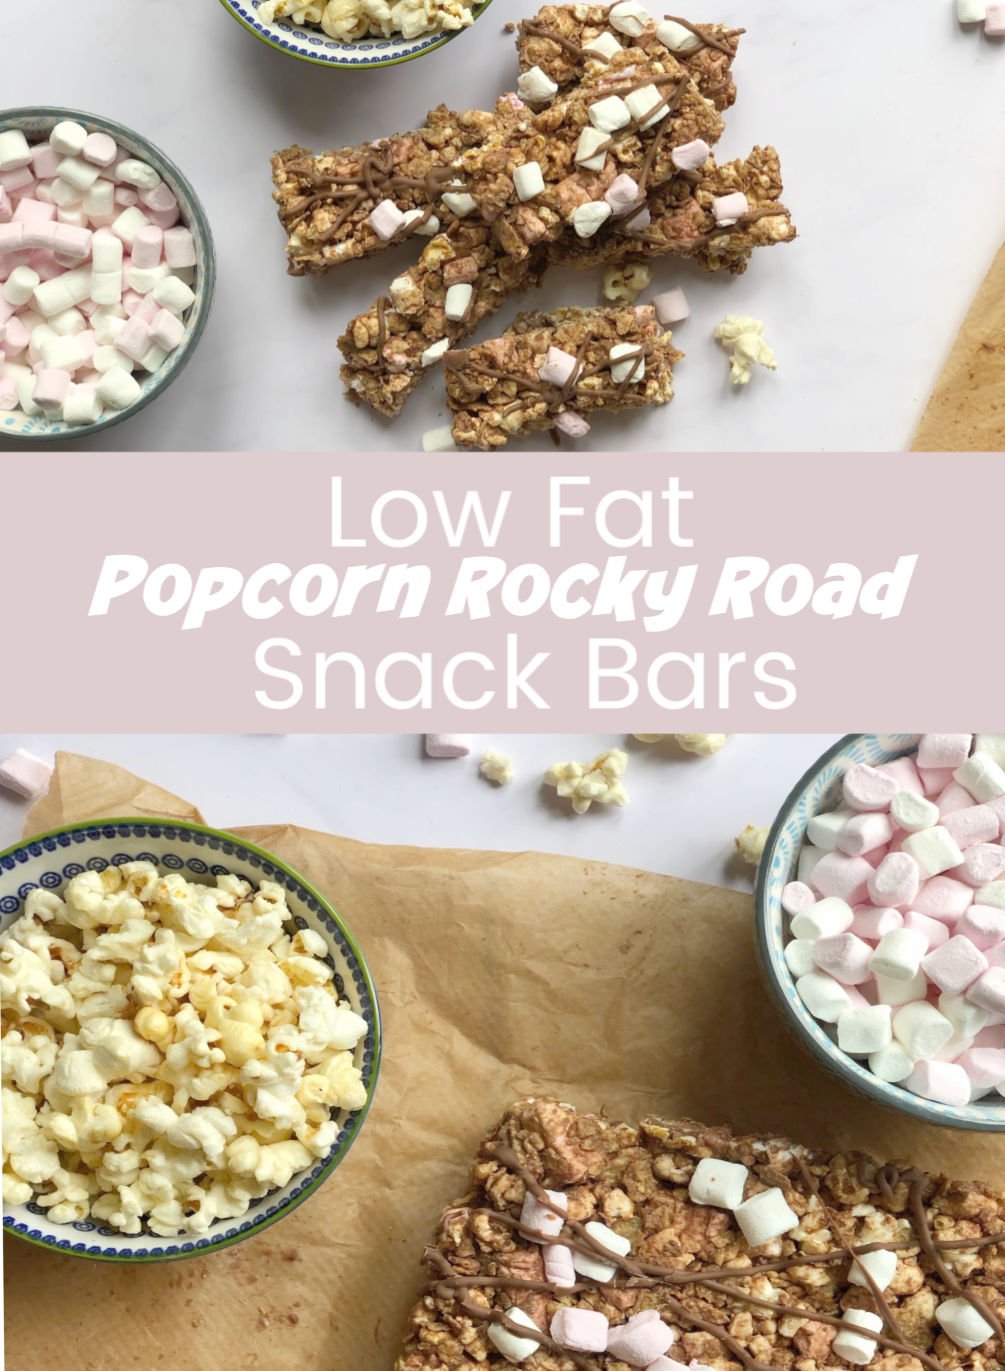 Low Fat Popcorn Rocky Road Bars For Low Carb, Low Fat snacks and great family treat.